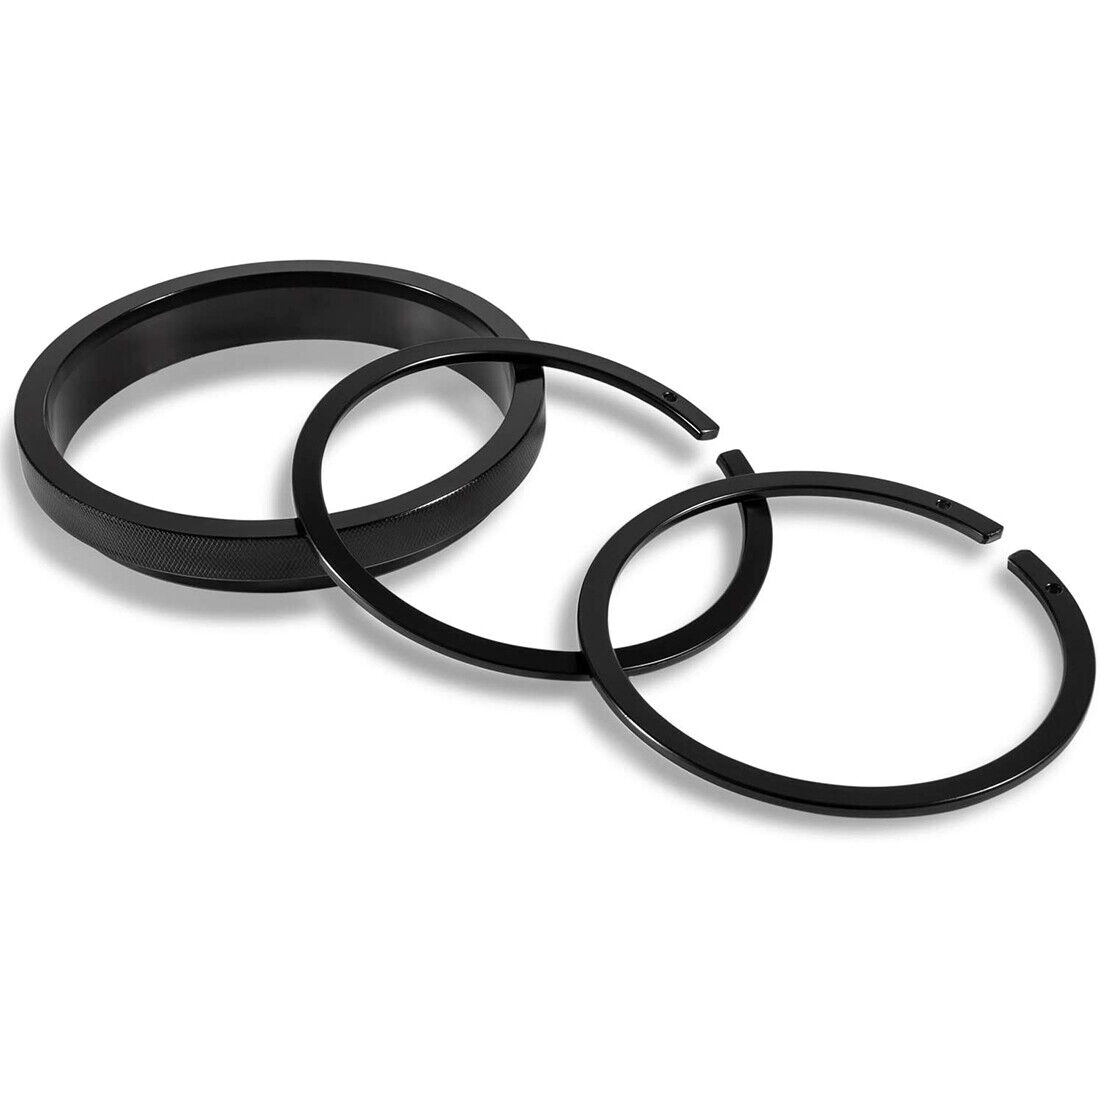 for Cummins ISX Piston Ring Compressor Adapter and Anti-Polishing Ring 5299339